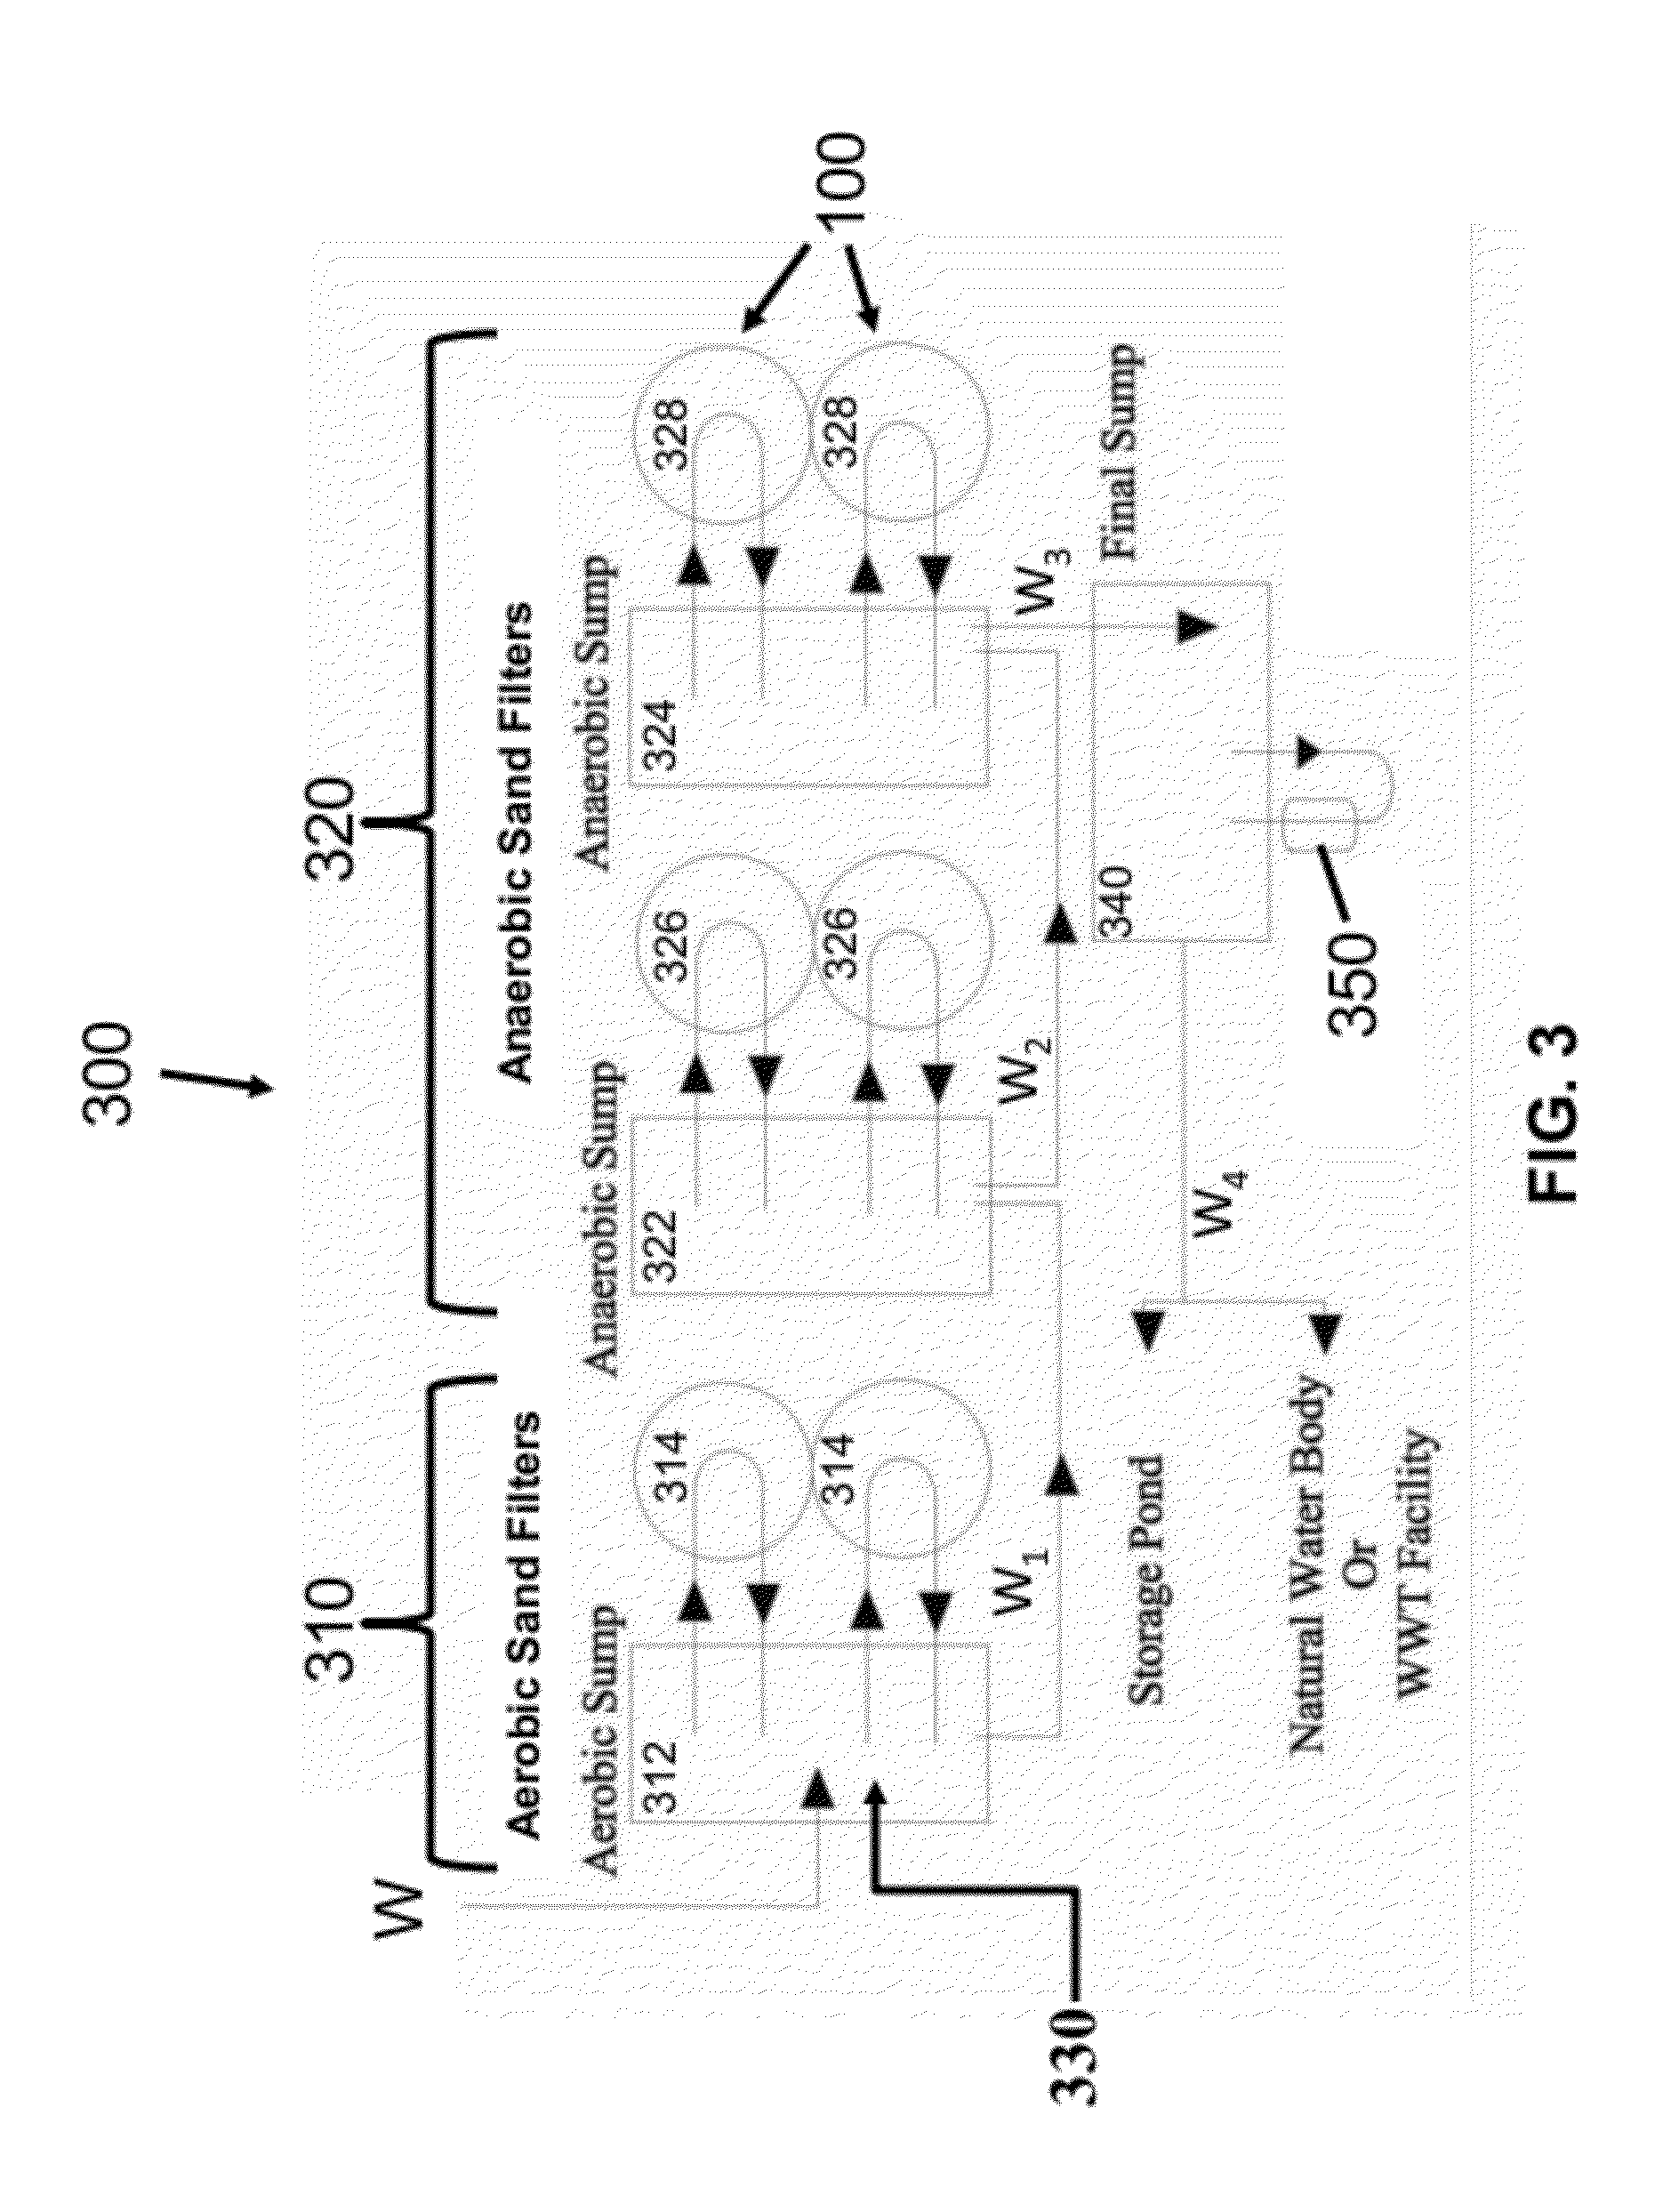 System and Process for Removing Nitrogen Compounds and Odors from Wastewater and Wastewater Treatment System